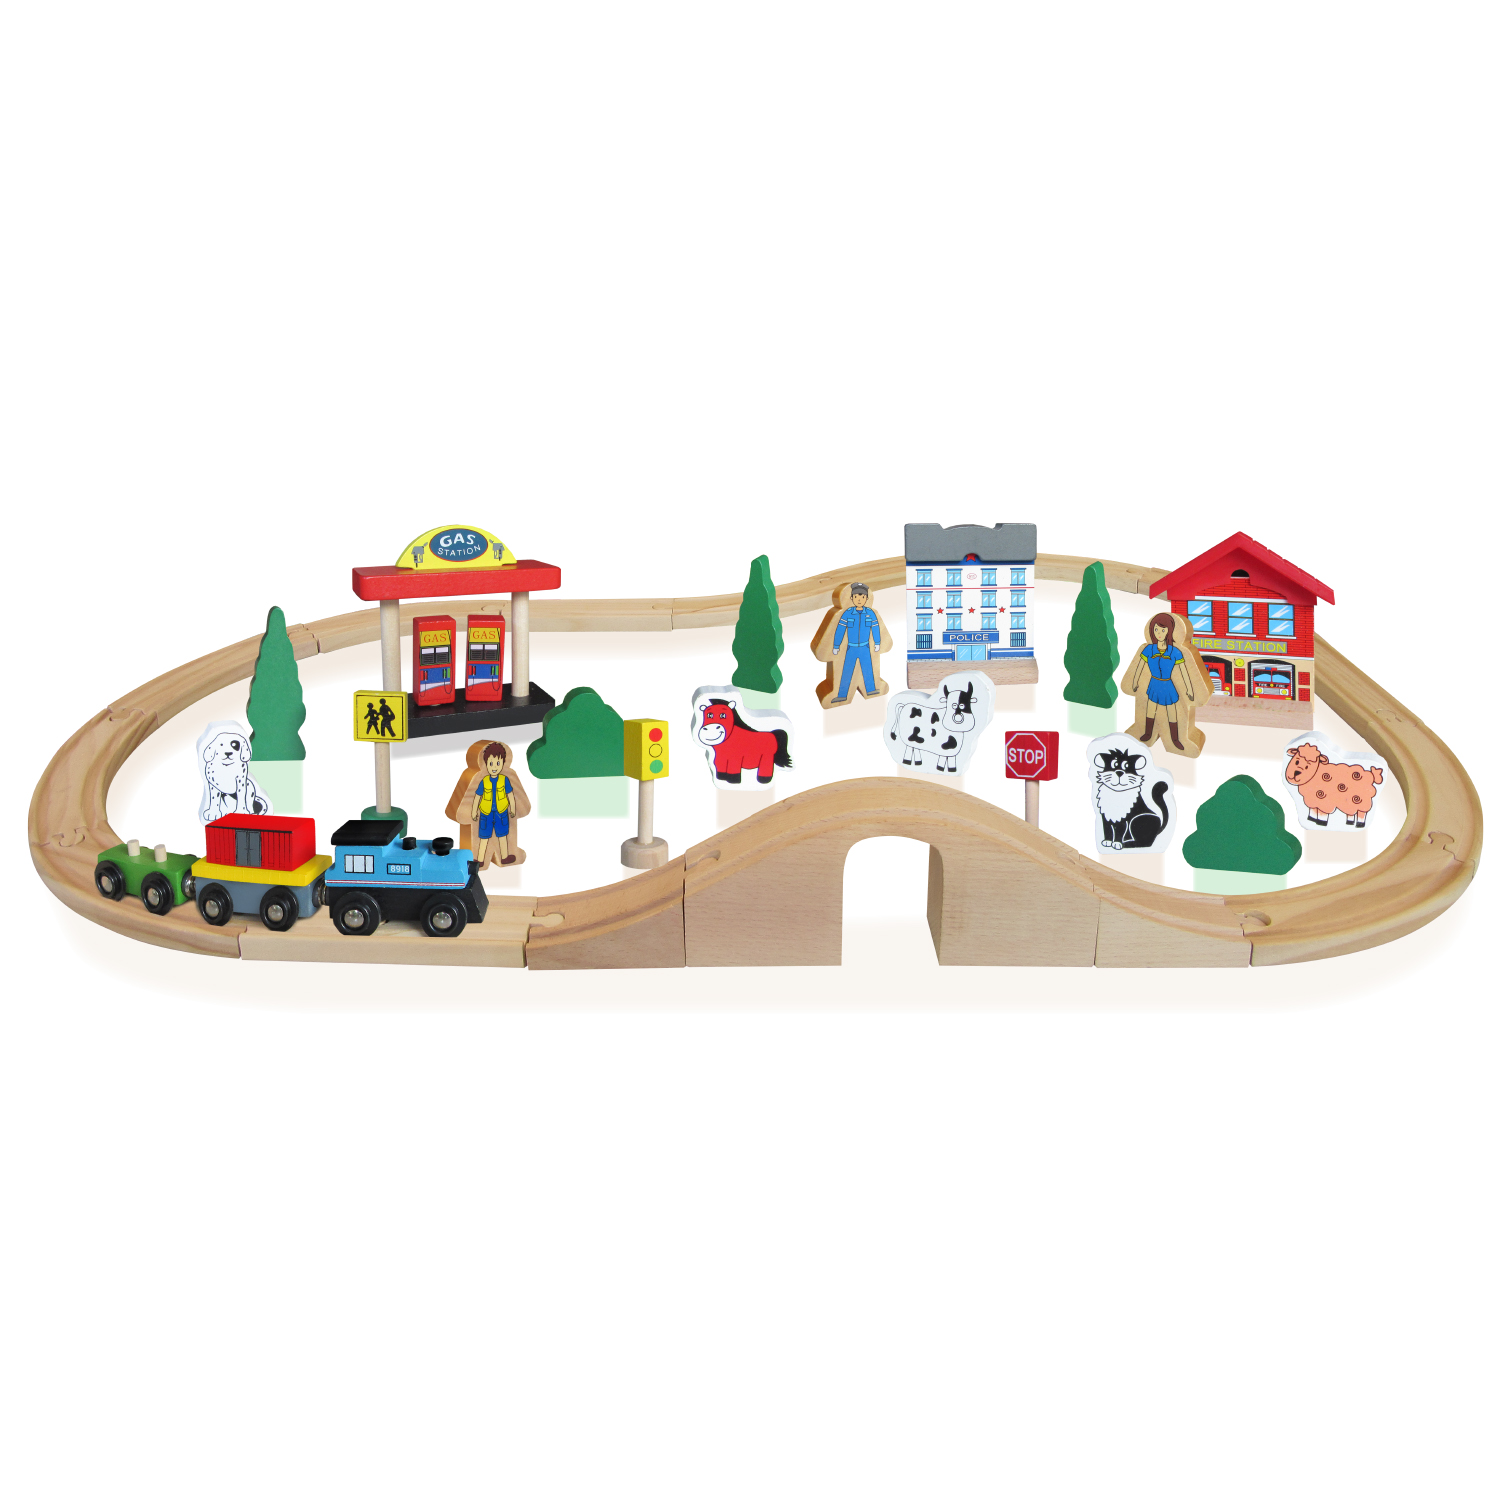 RGS wooden train set with characters and scenery